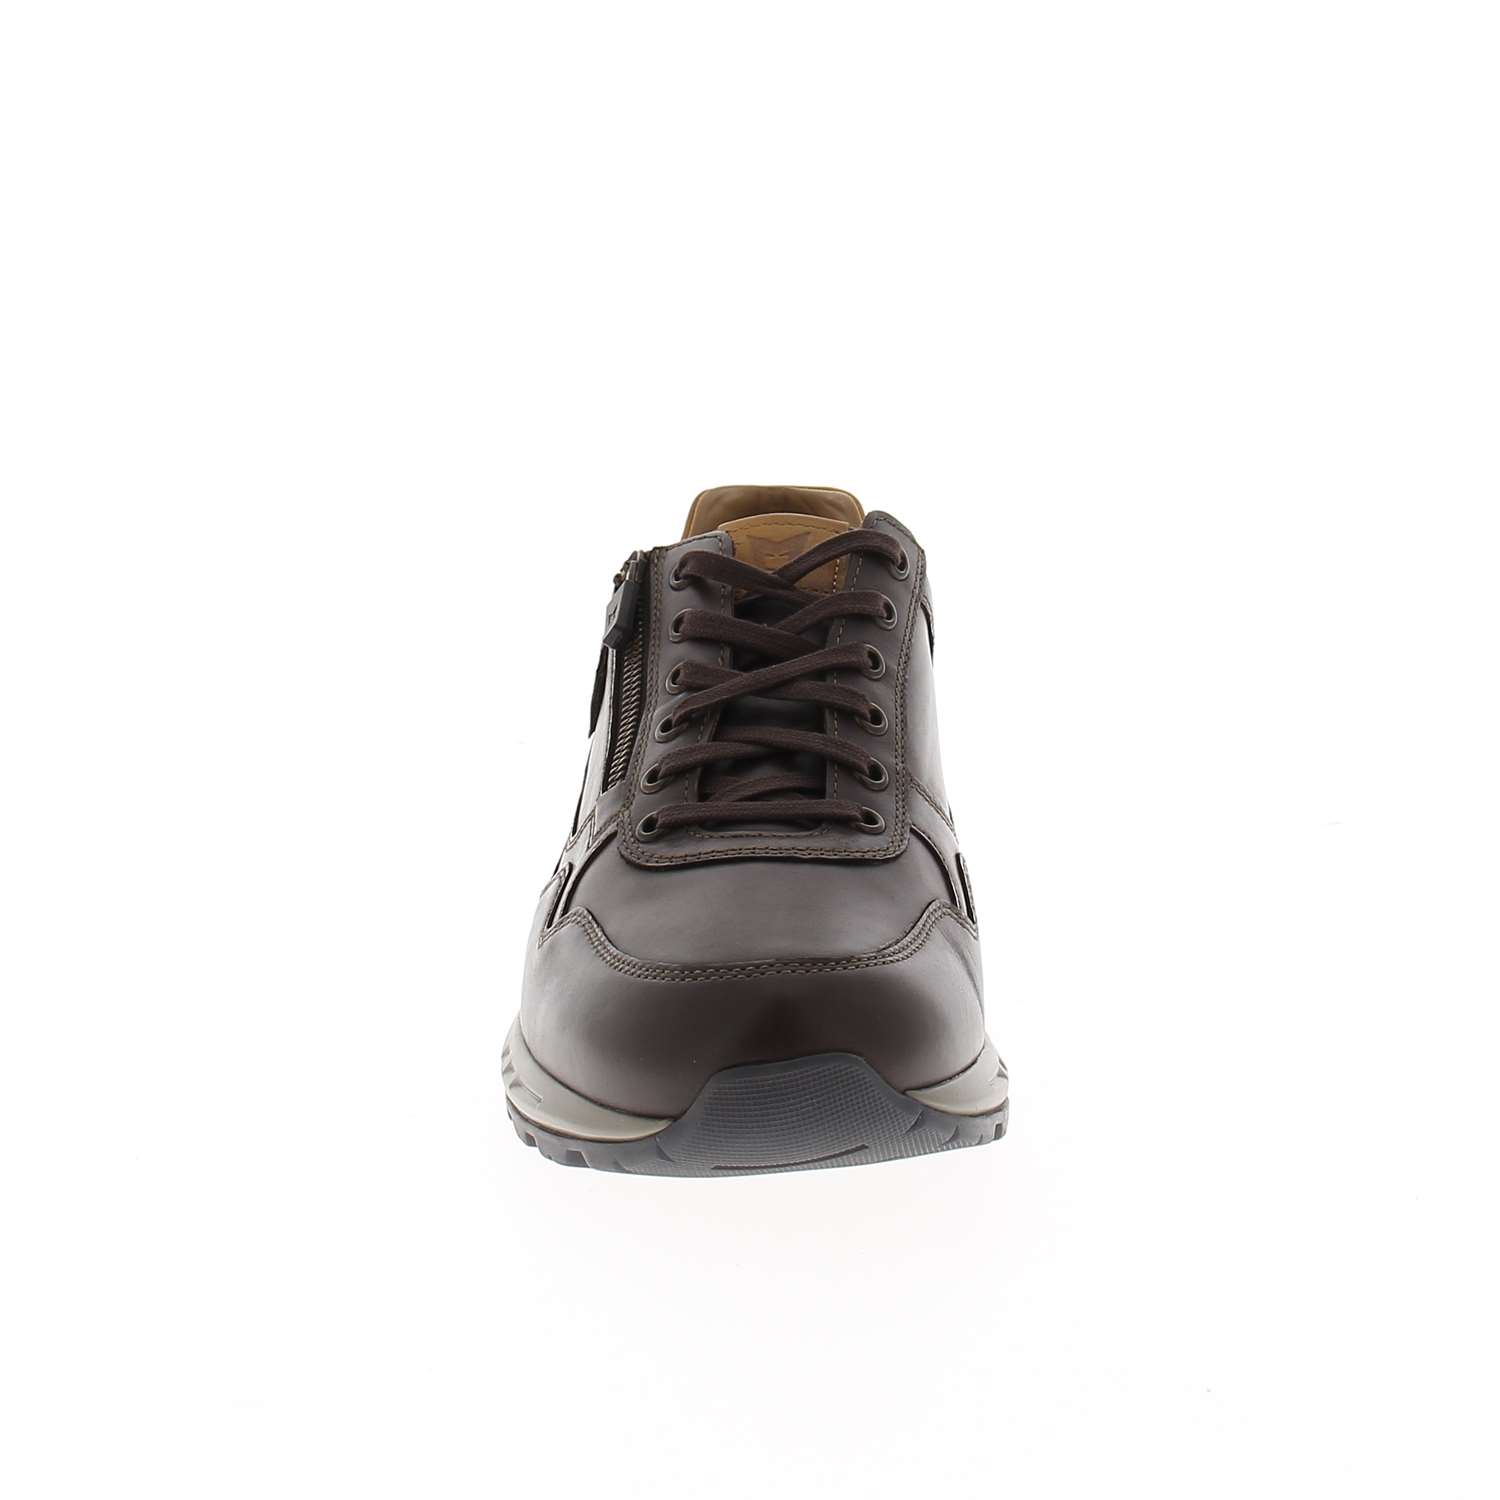 03 - BRADLEY - MEPHISTO - Chaussures à lacets - Cuir